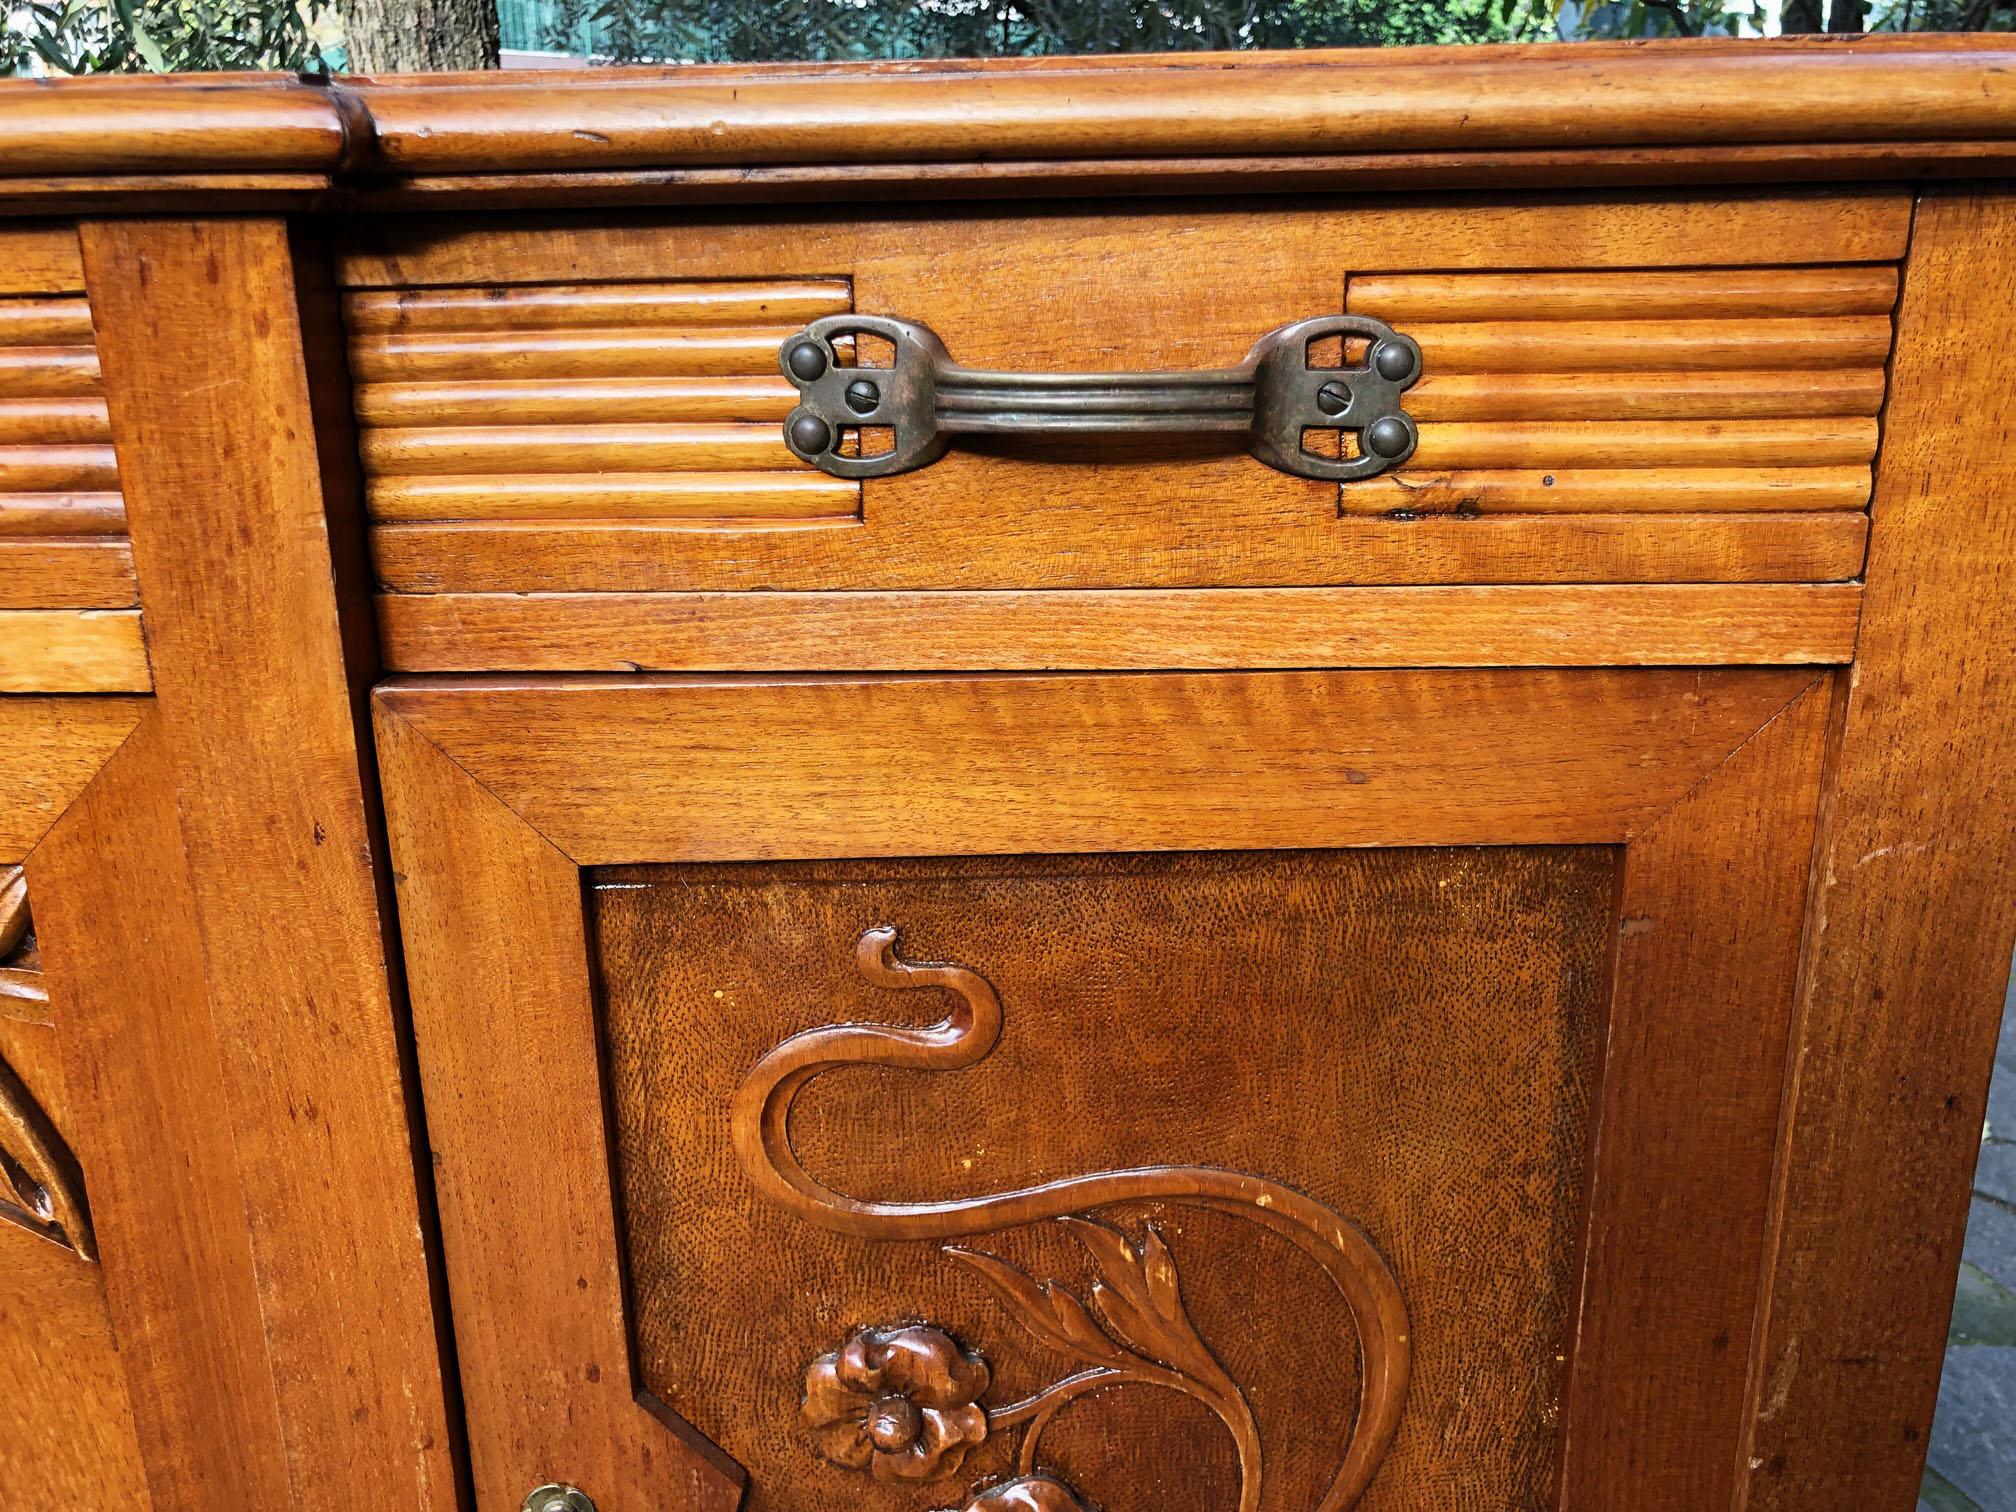 Early 20th Century Original Italian Art Noveau Sideboard in Honey-Colored Walnut with Three Drawers For Sale